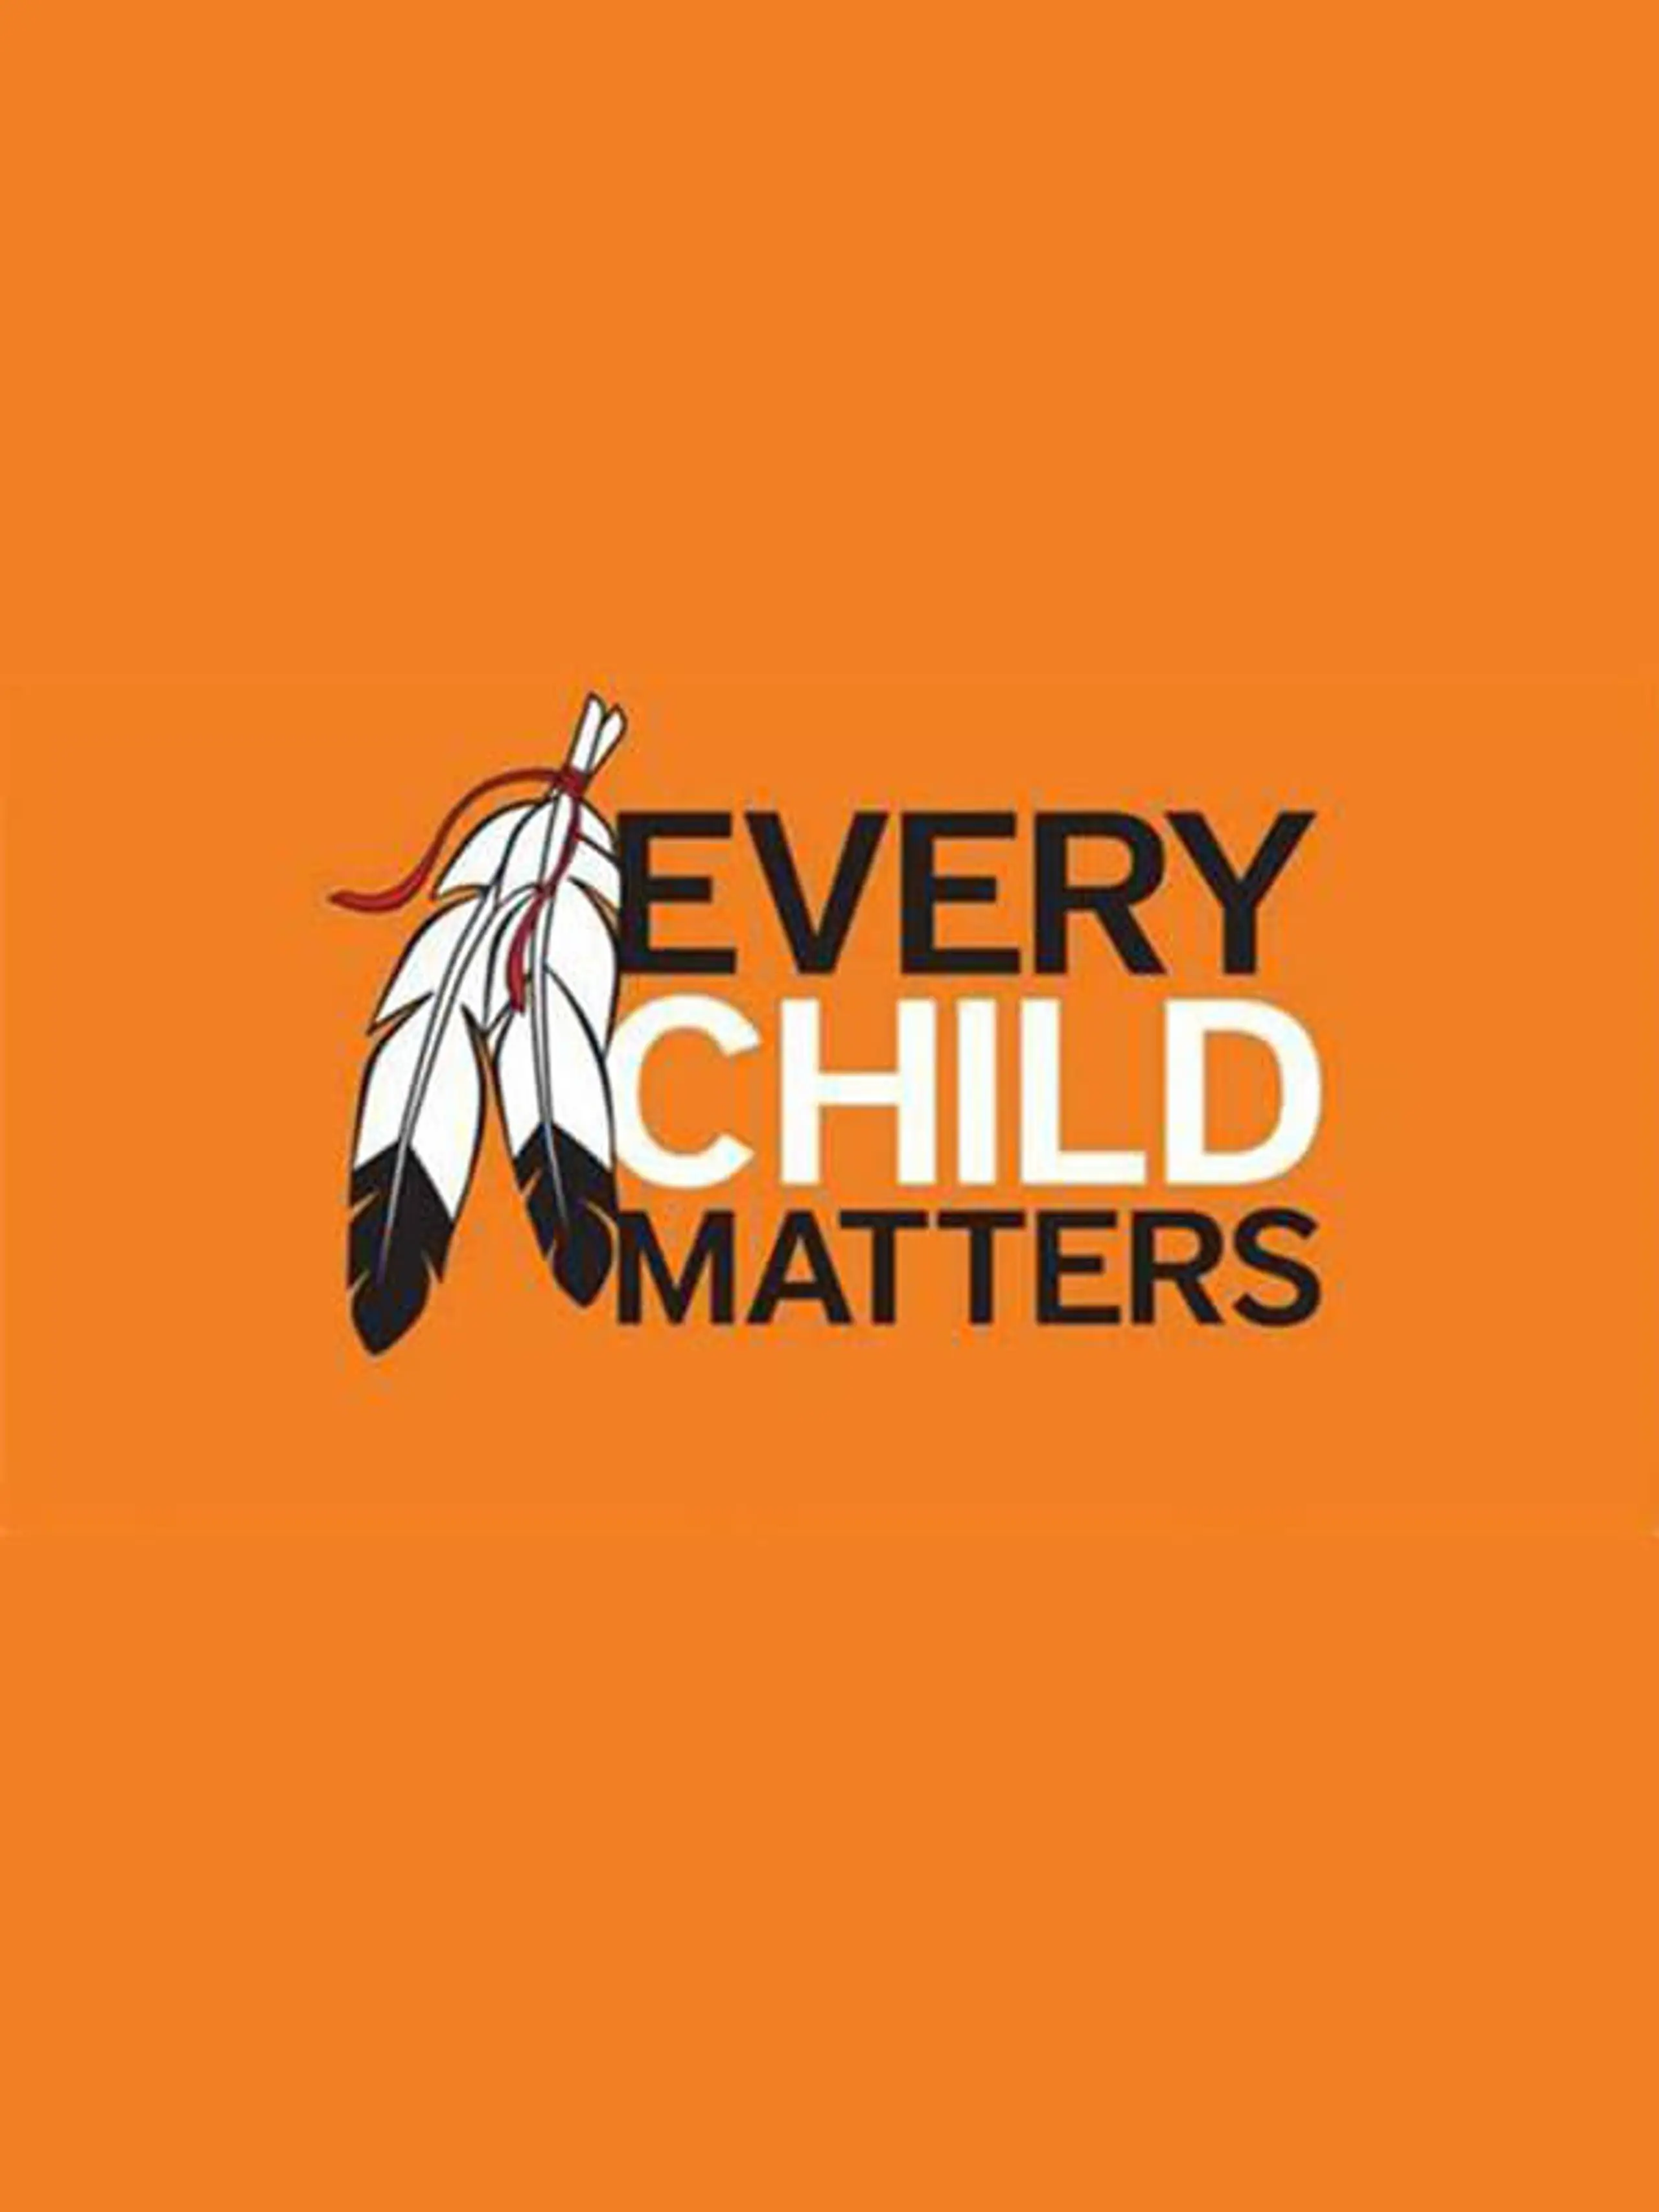 Every Child Matters: Reconciliation Through Education